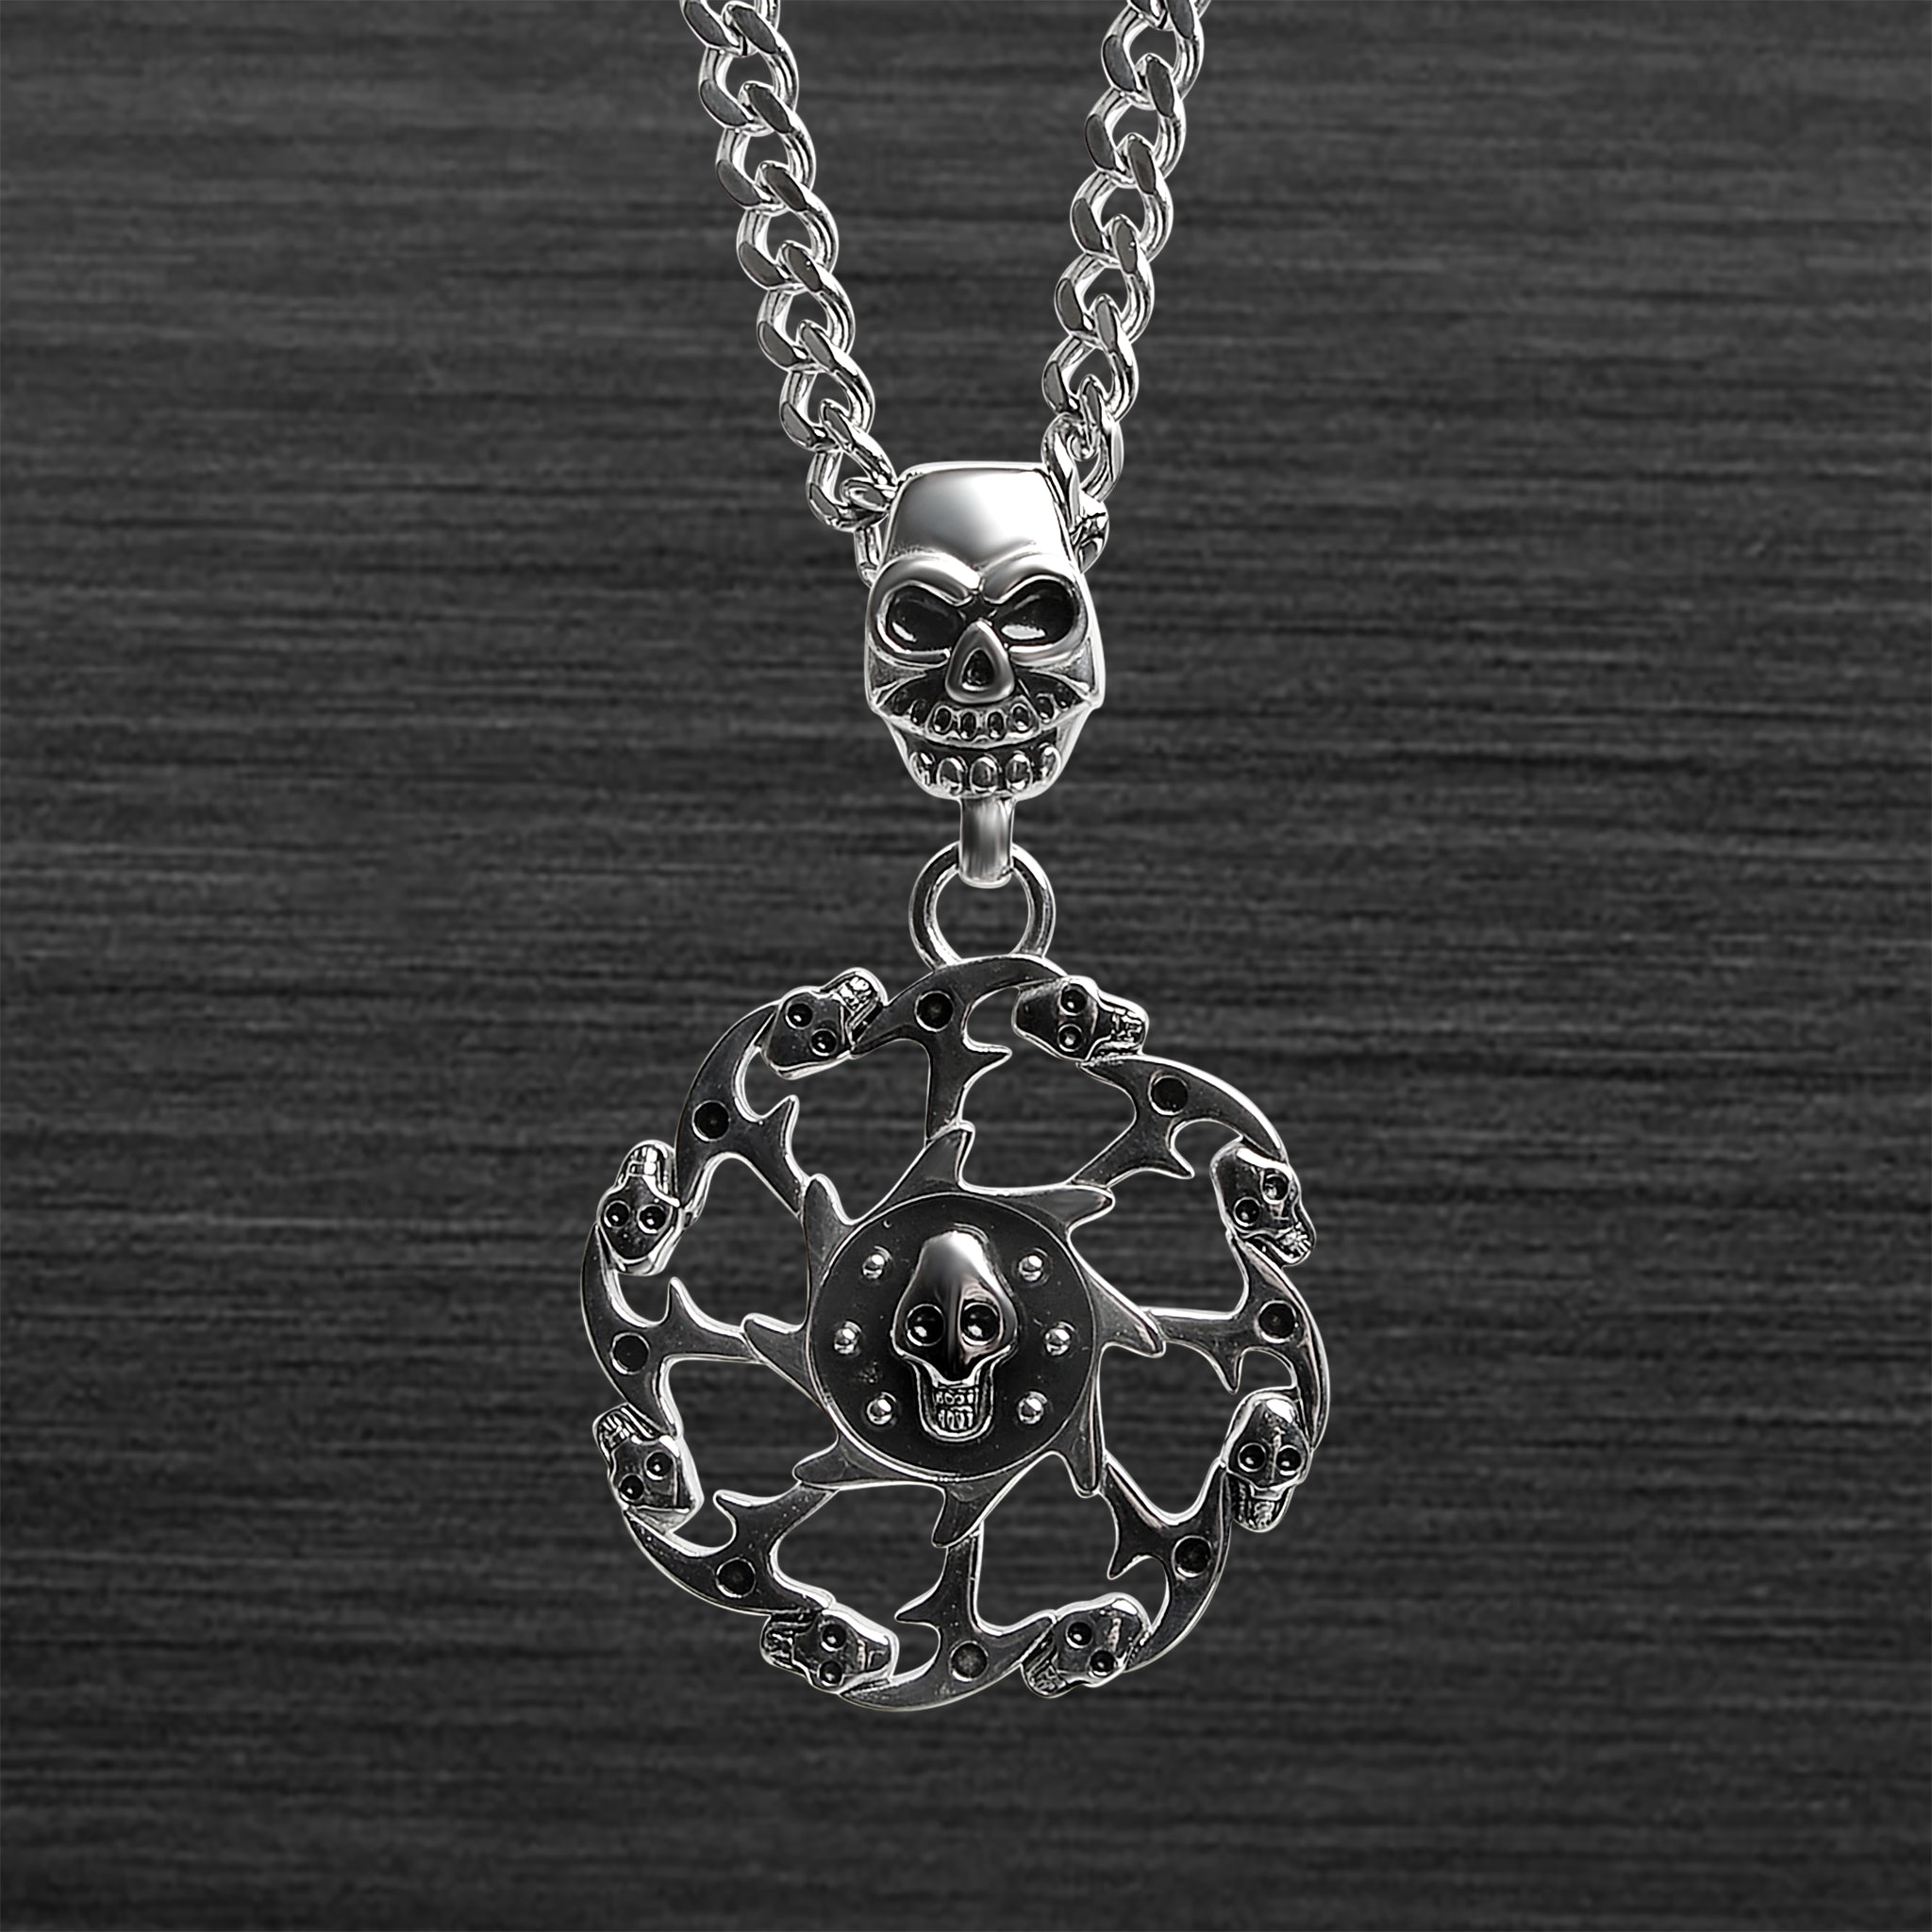 Stainless Steel SKULL Spiked Death Wheel Curb Chain Necklace / PDK0149-RTL